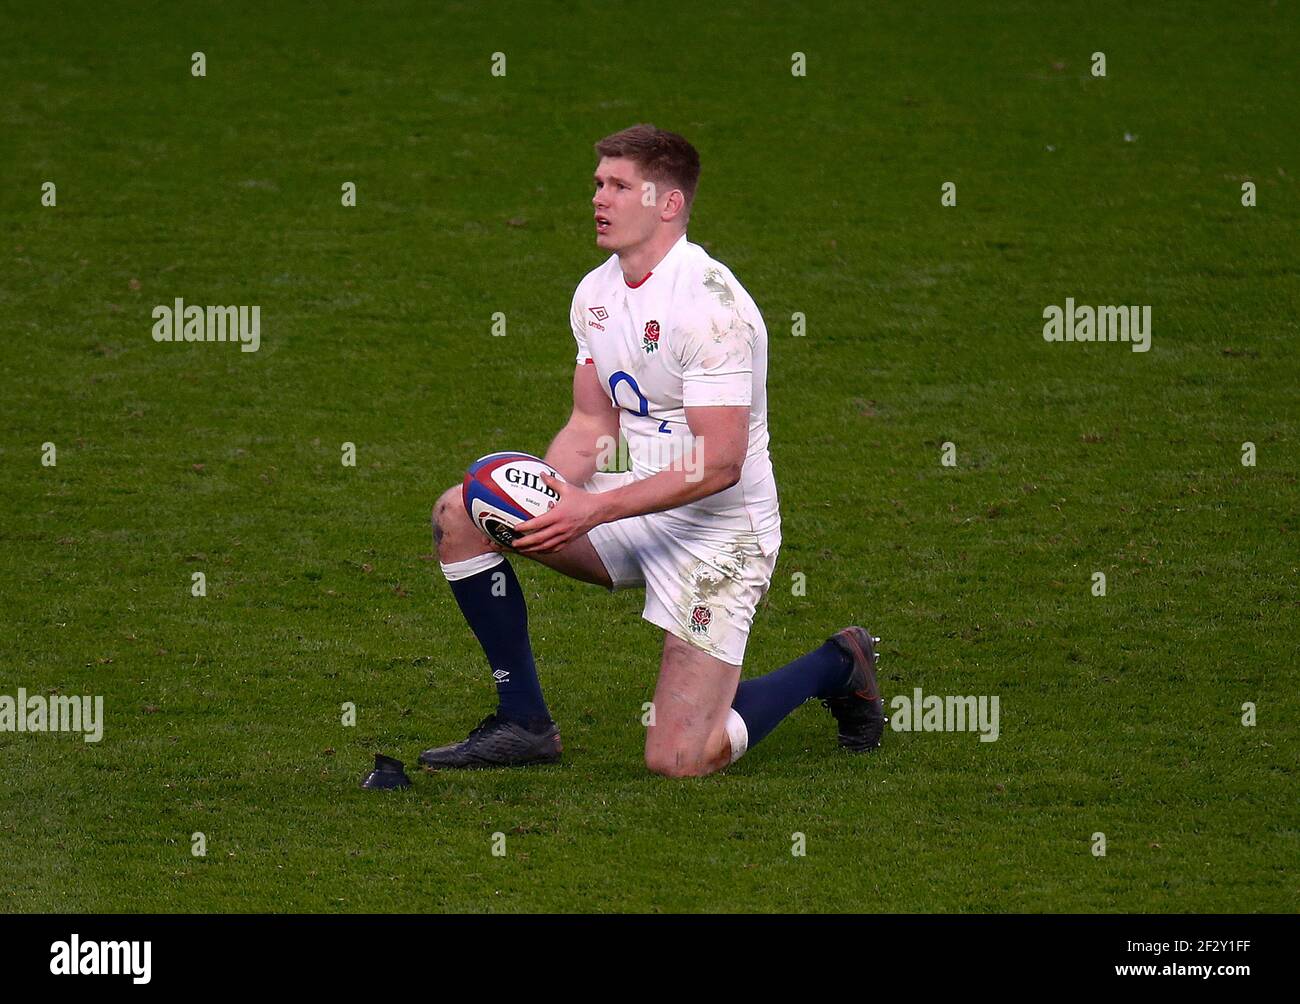 London, UK. 13th Mar, 2021. TWICKENHAM, ENGLAND - MARCH 13: Owen Farrell of England during Guinness 6 Nations between England and France at Twickenham Stadium, London, UK on 13th March 2021 Credit: Action Foto Sport/Alamy Live News Stock Photo